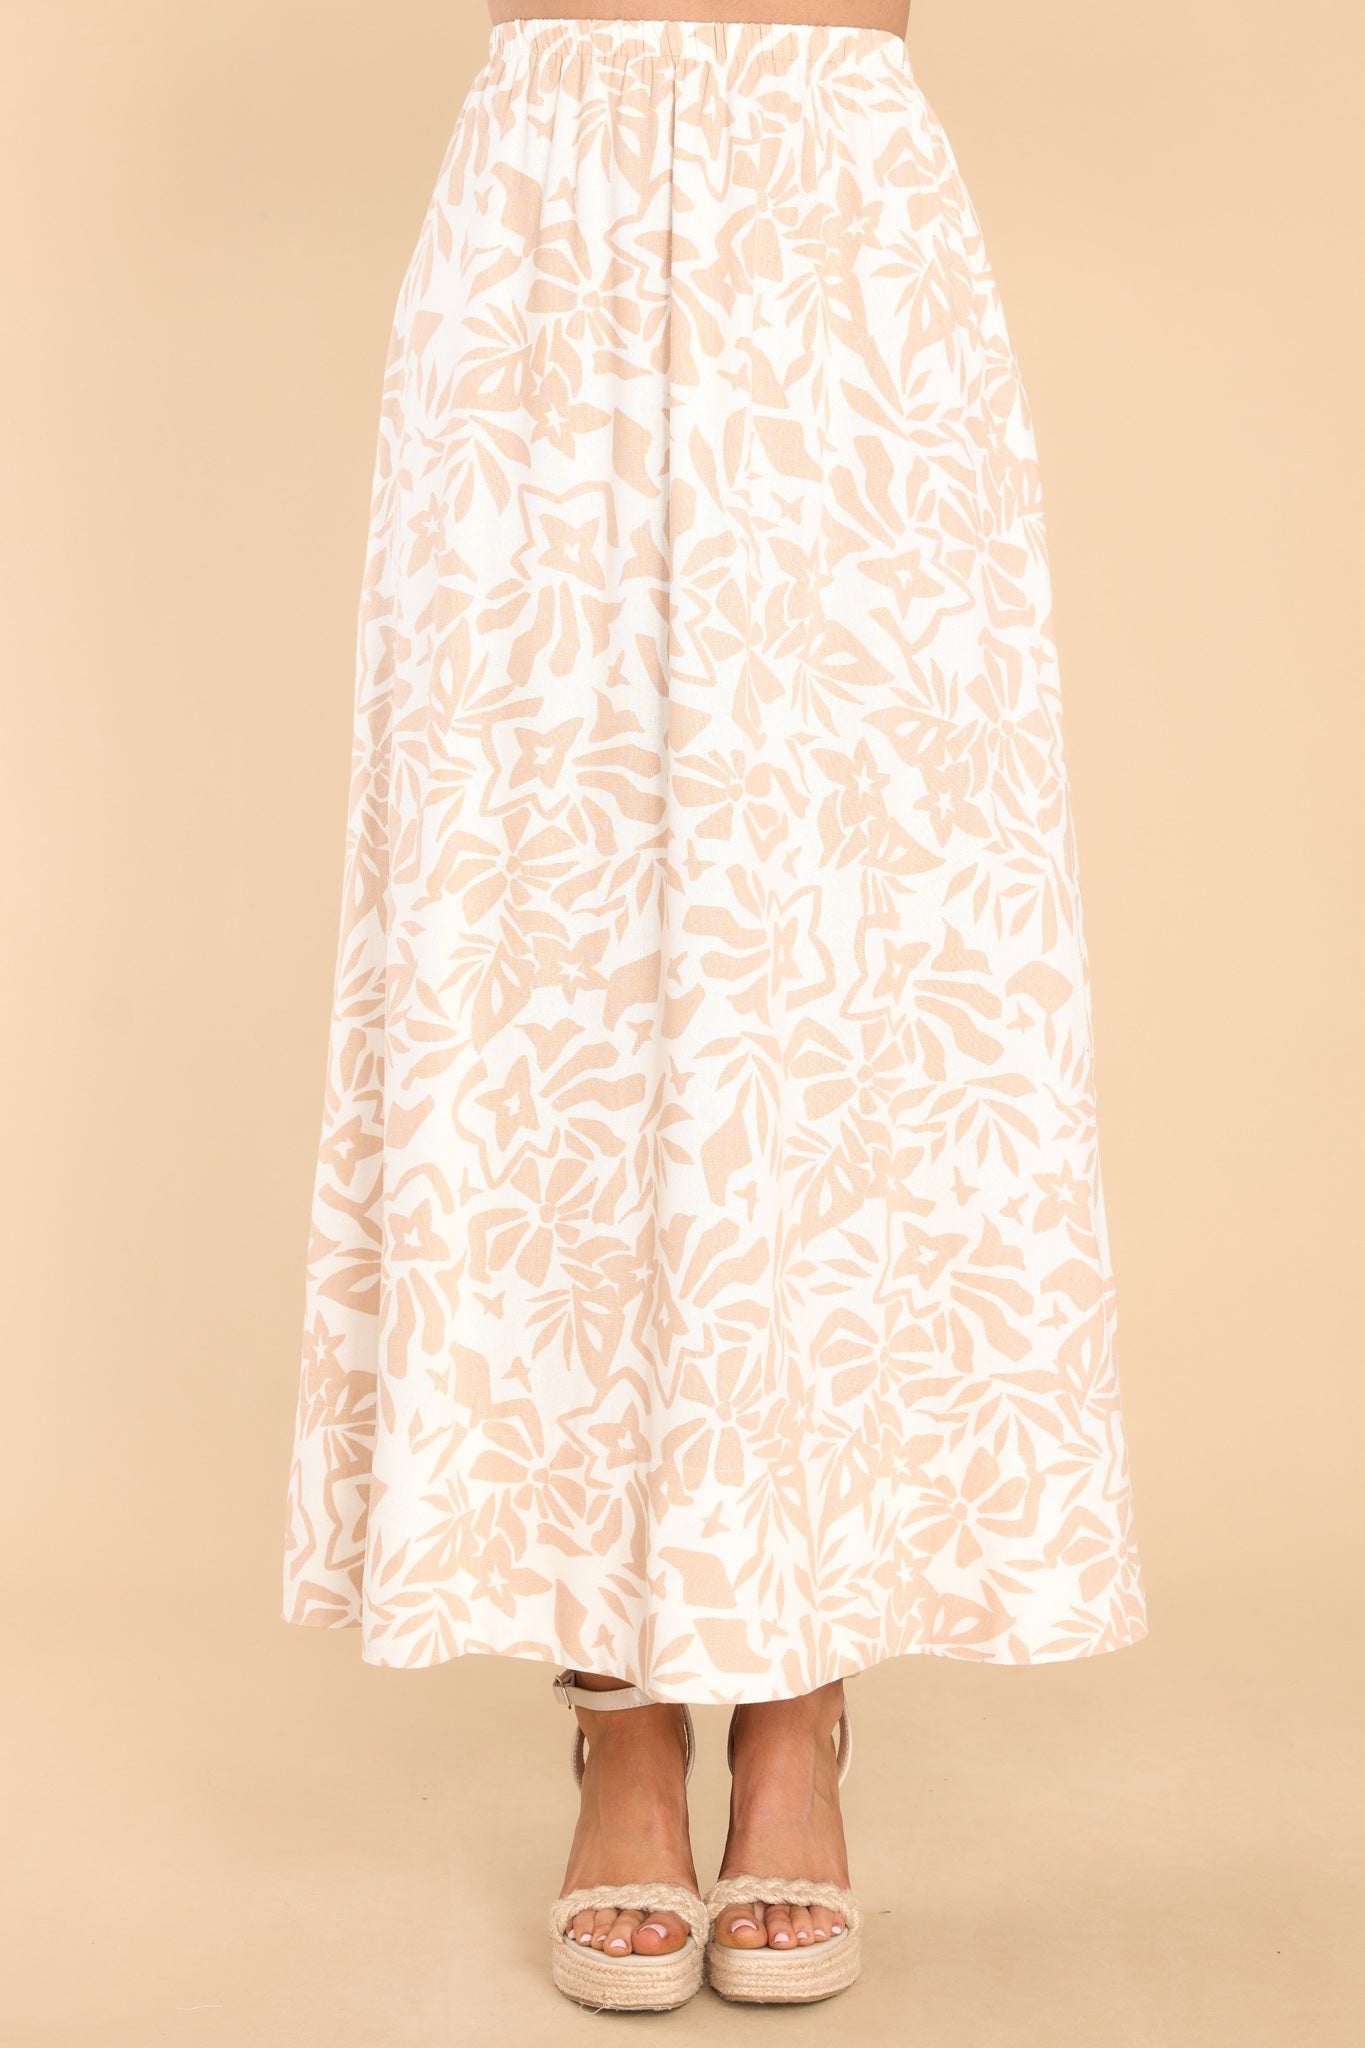 Front view of this skirt that features a high elastic waistband, pockets at the hip, and is flowy throughout.